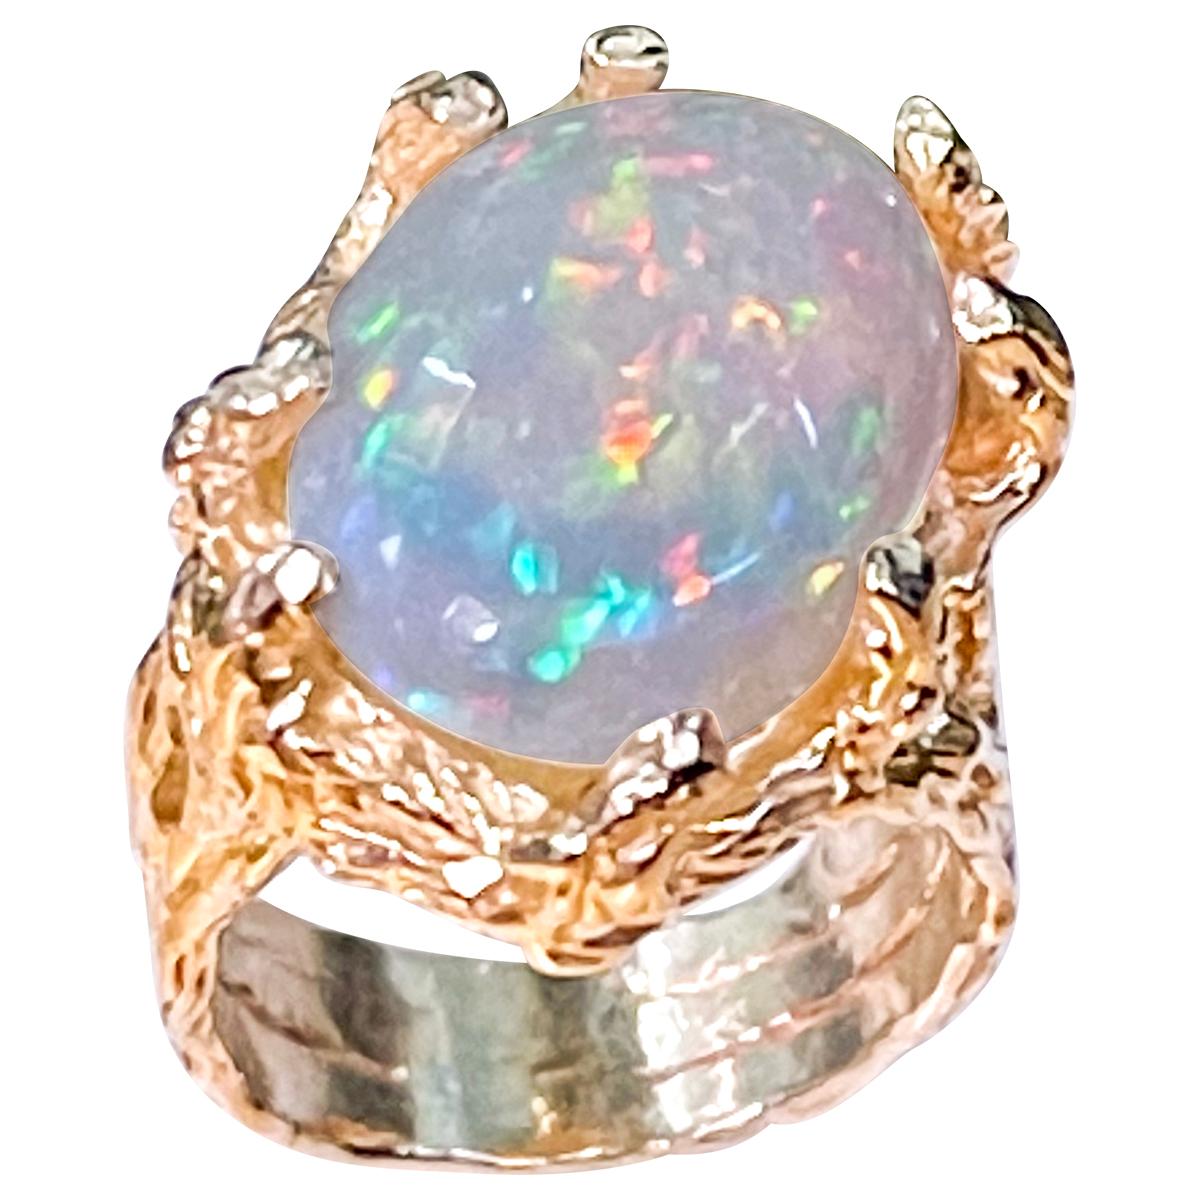 9 Carat Oval Shape Ethiopian Opal Cocktail Ring 14 Karat Yellow Gold size 6
Oval  Natural Opal  A classic, Cocktail ring 
14 Karat Yellow Gold Estate
Size of the opal 17 X 13 MM, Approximately 9 Ct
Amazing colors in this opal and a great quality